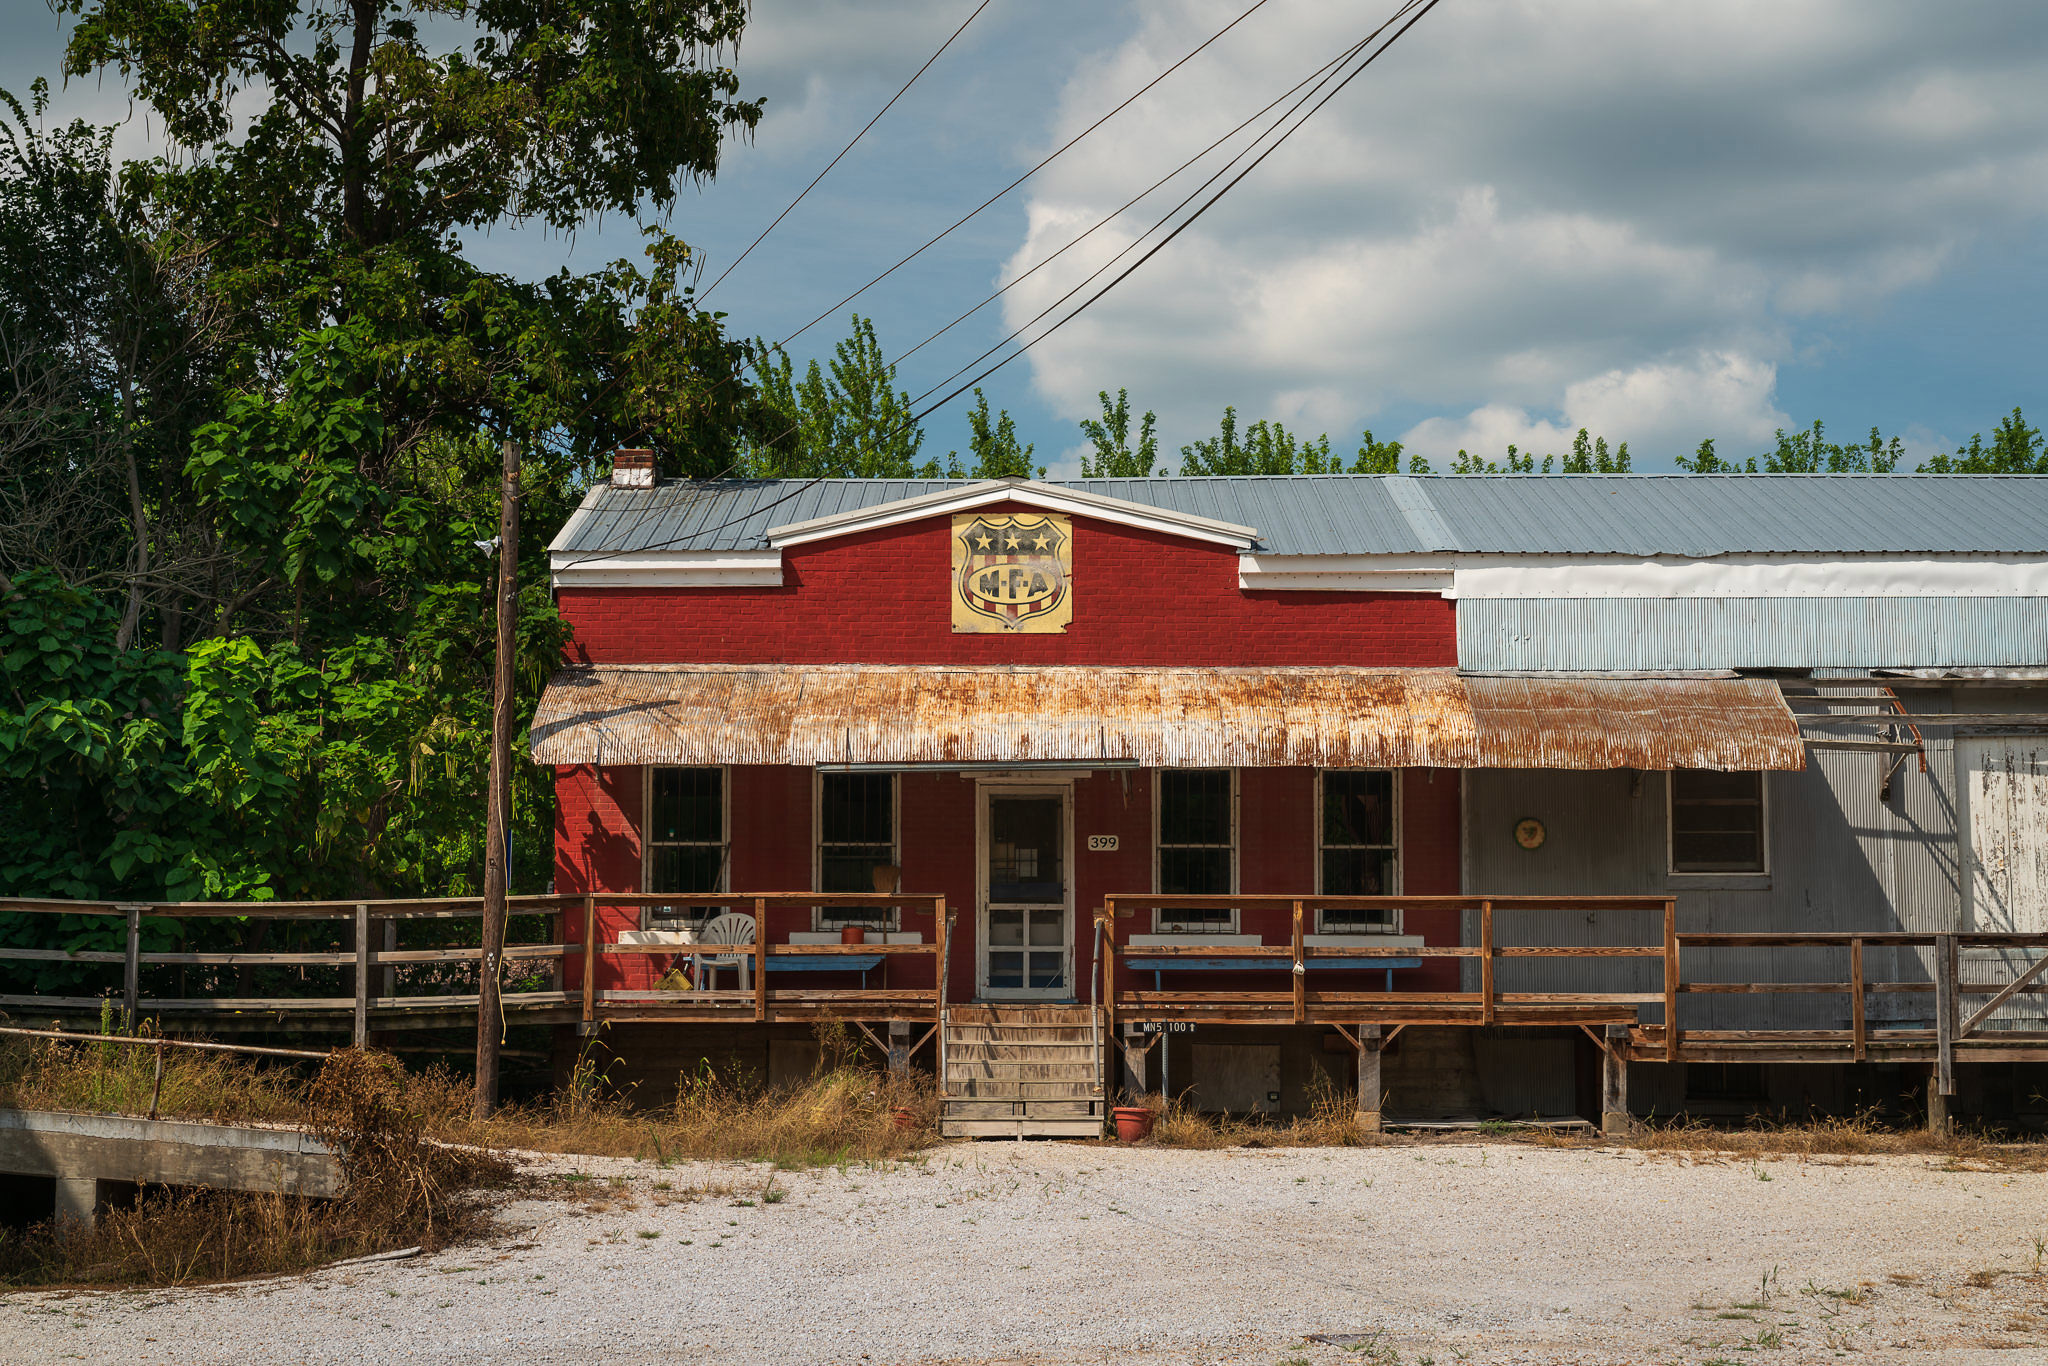 A photograph of a rural feed store with a cloudy sky.